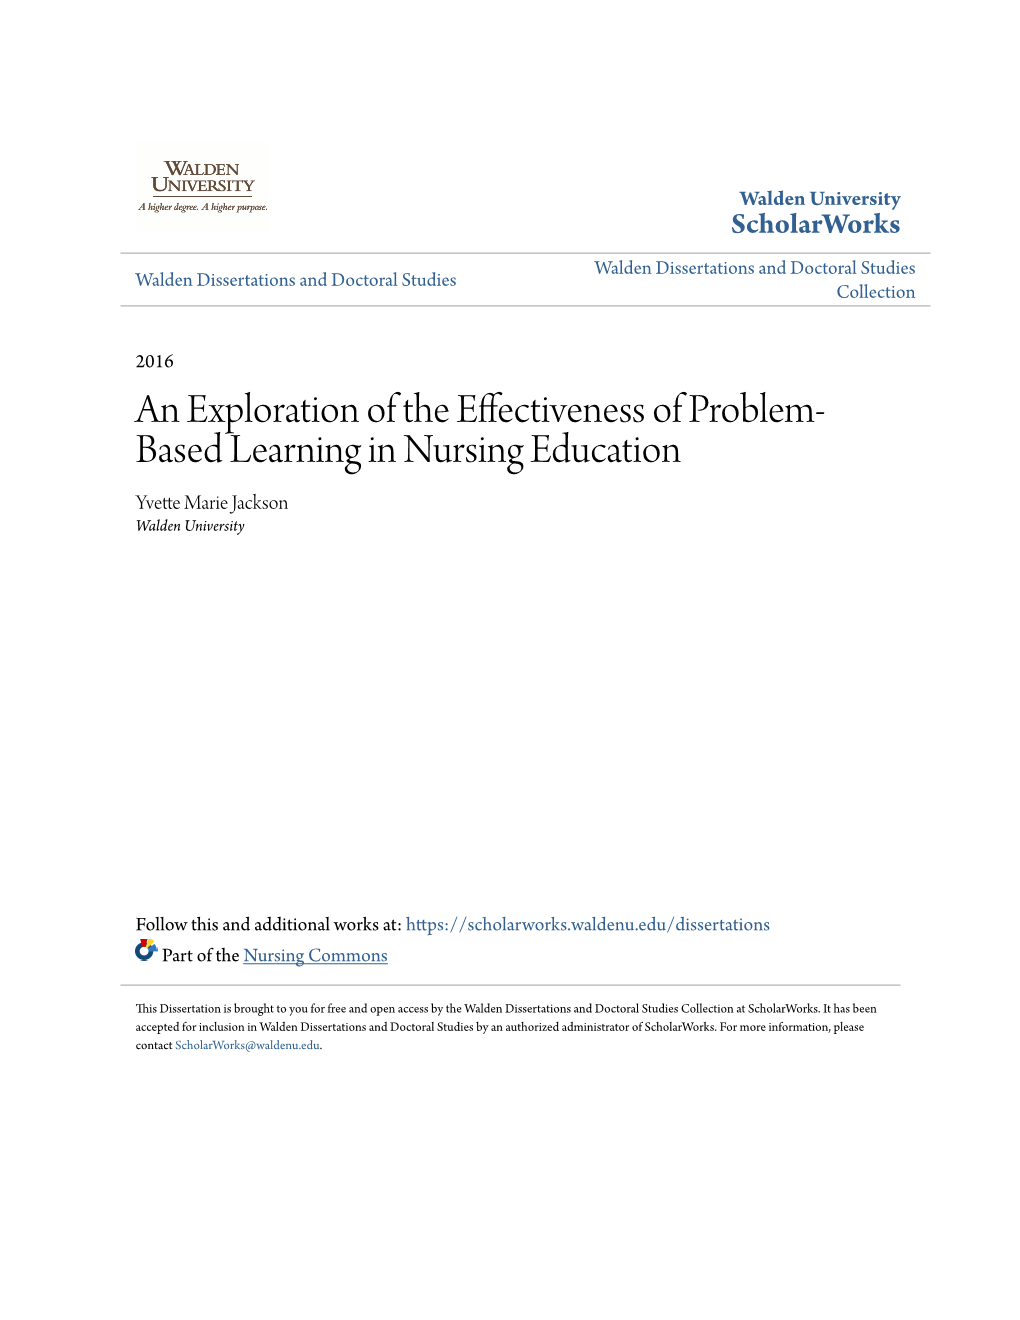 An Exploration of the Effectiveness of Problem-Based Learning in Nursing Education